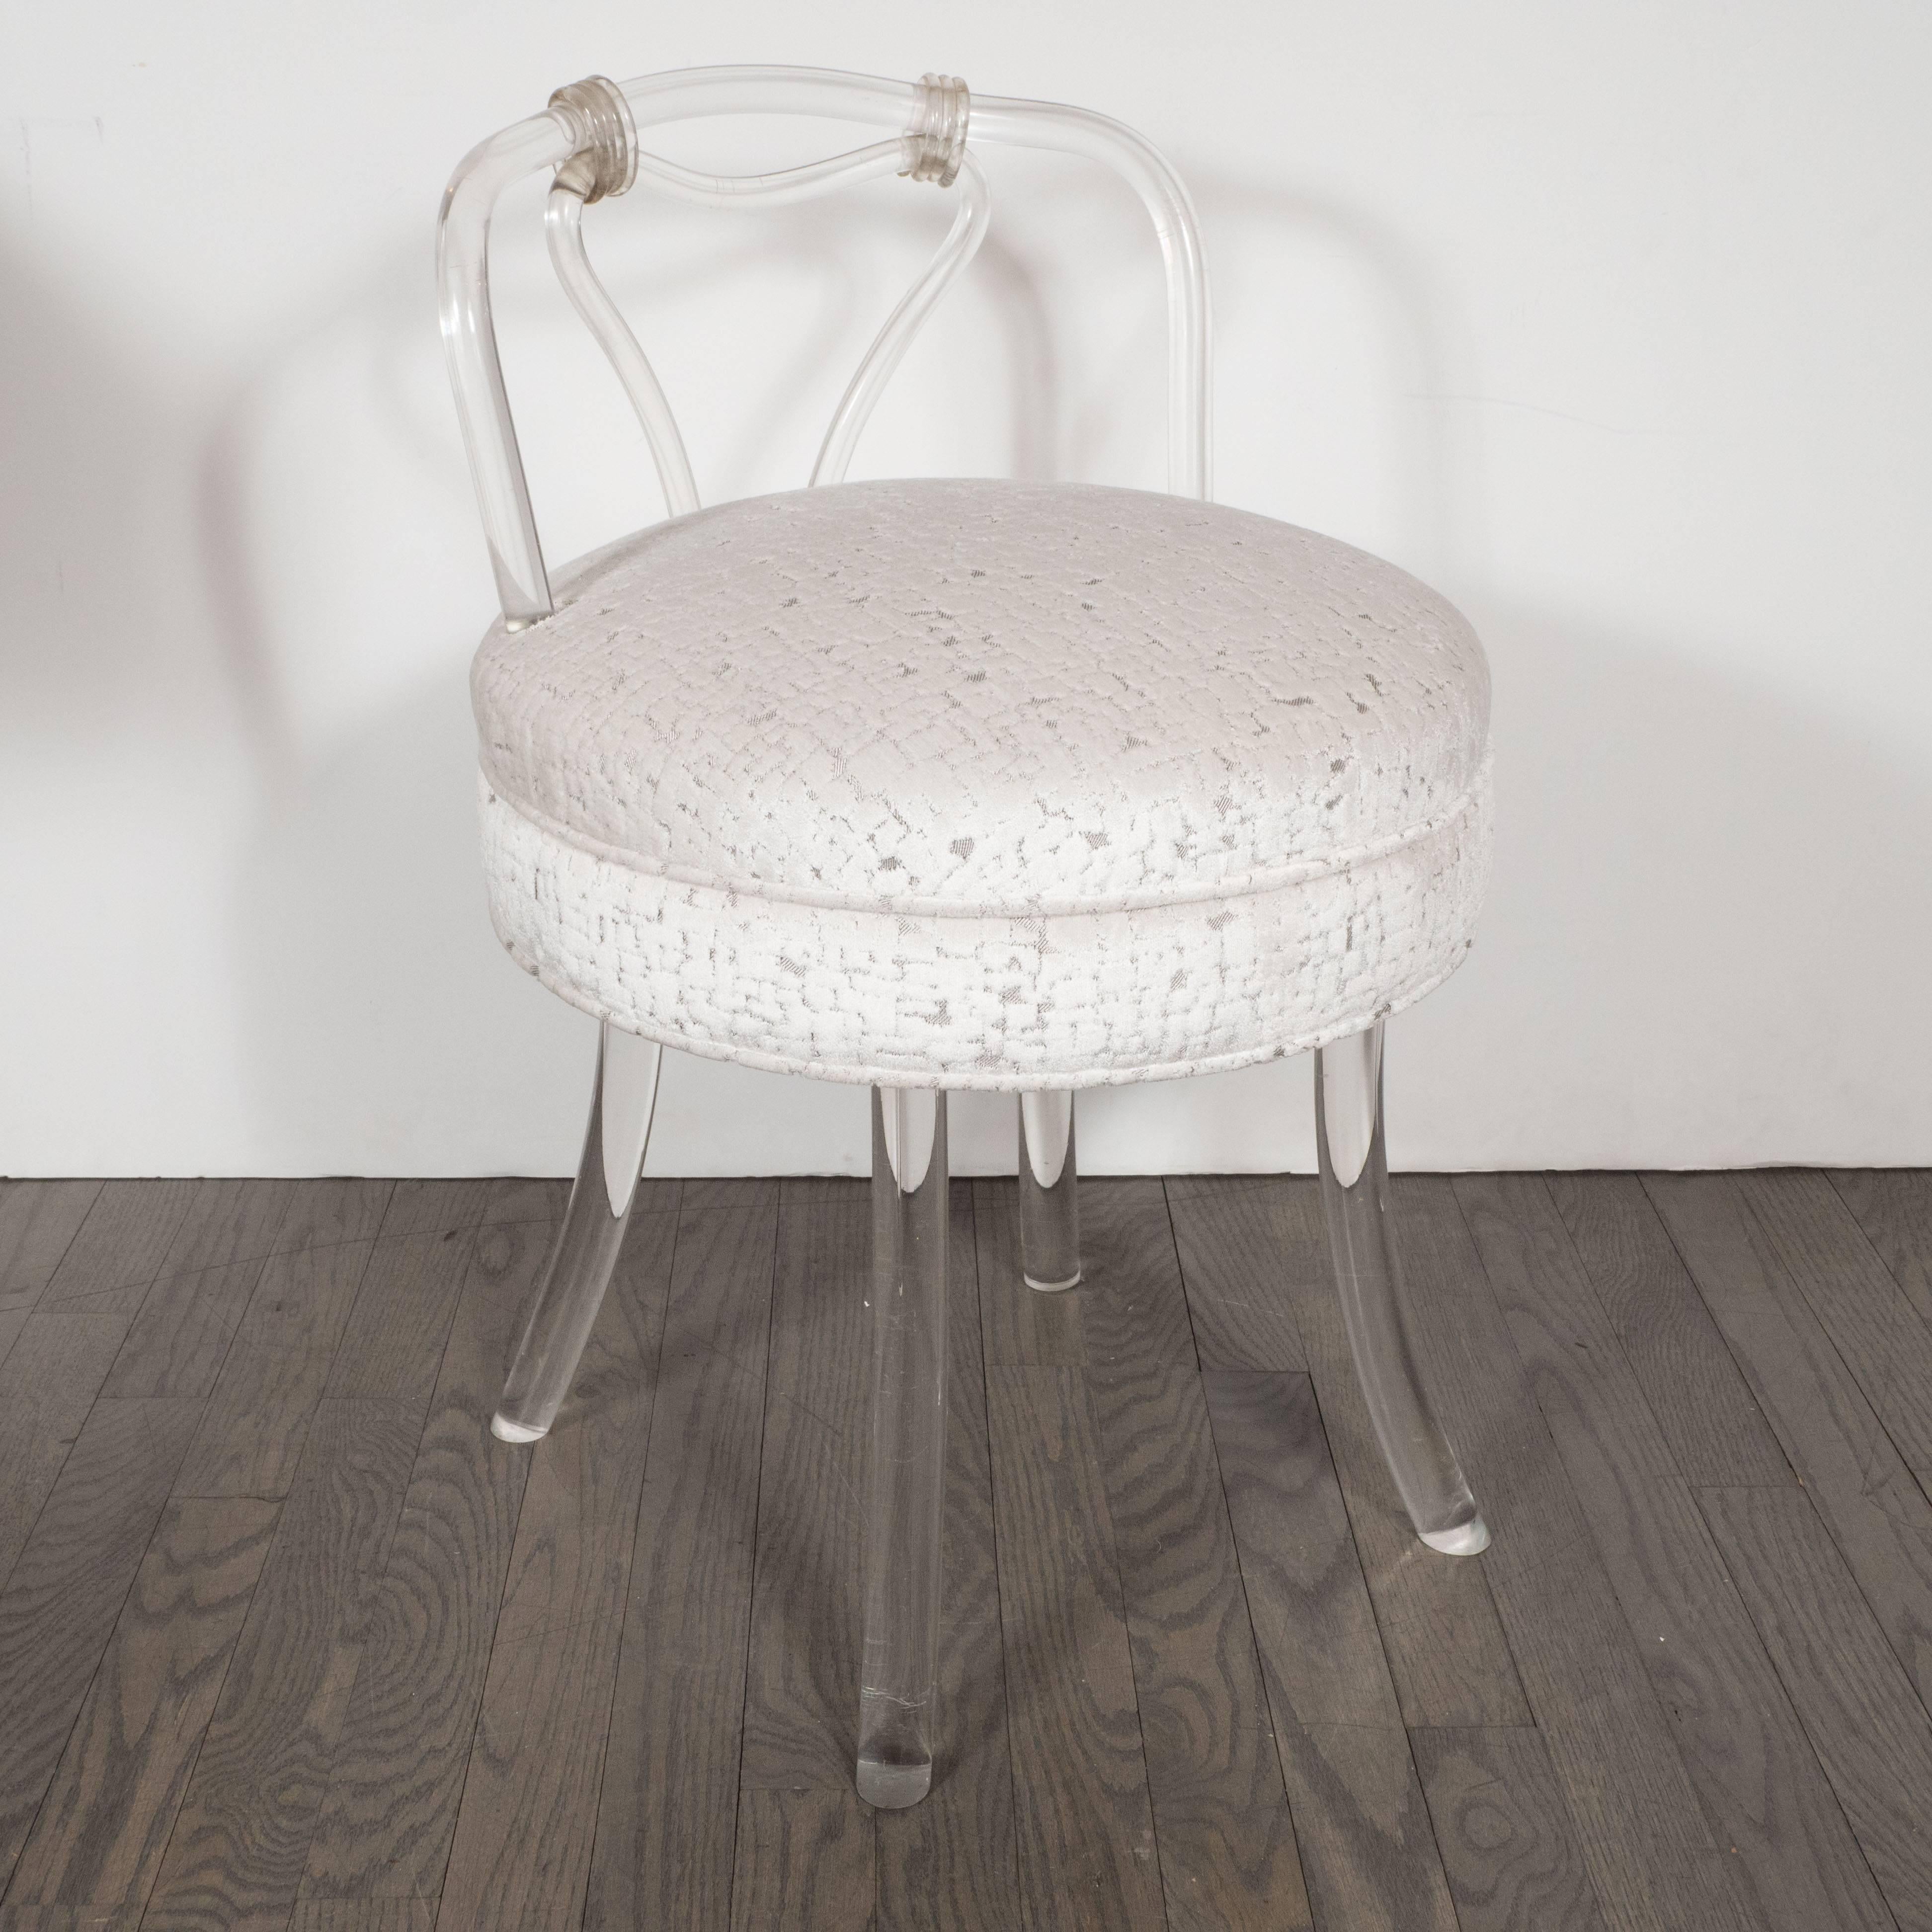 This sophisticated and glamorous Lucite stool was realized in America, circa 1950. Produced in the Hollywood regency style, this piece recalls the refined sensibility of a bygone era. It features an undulating back composed of Lucite with an